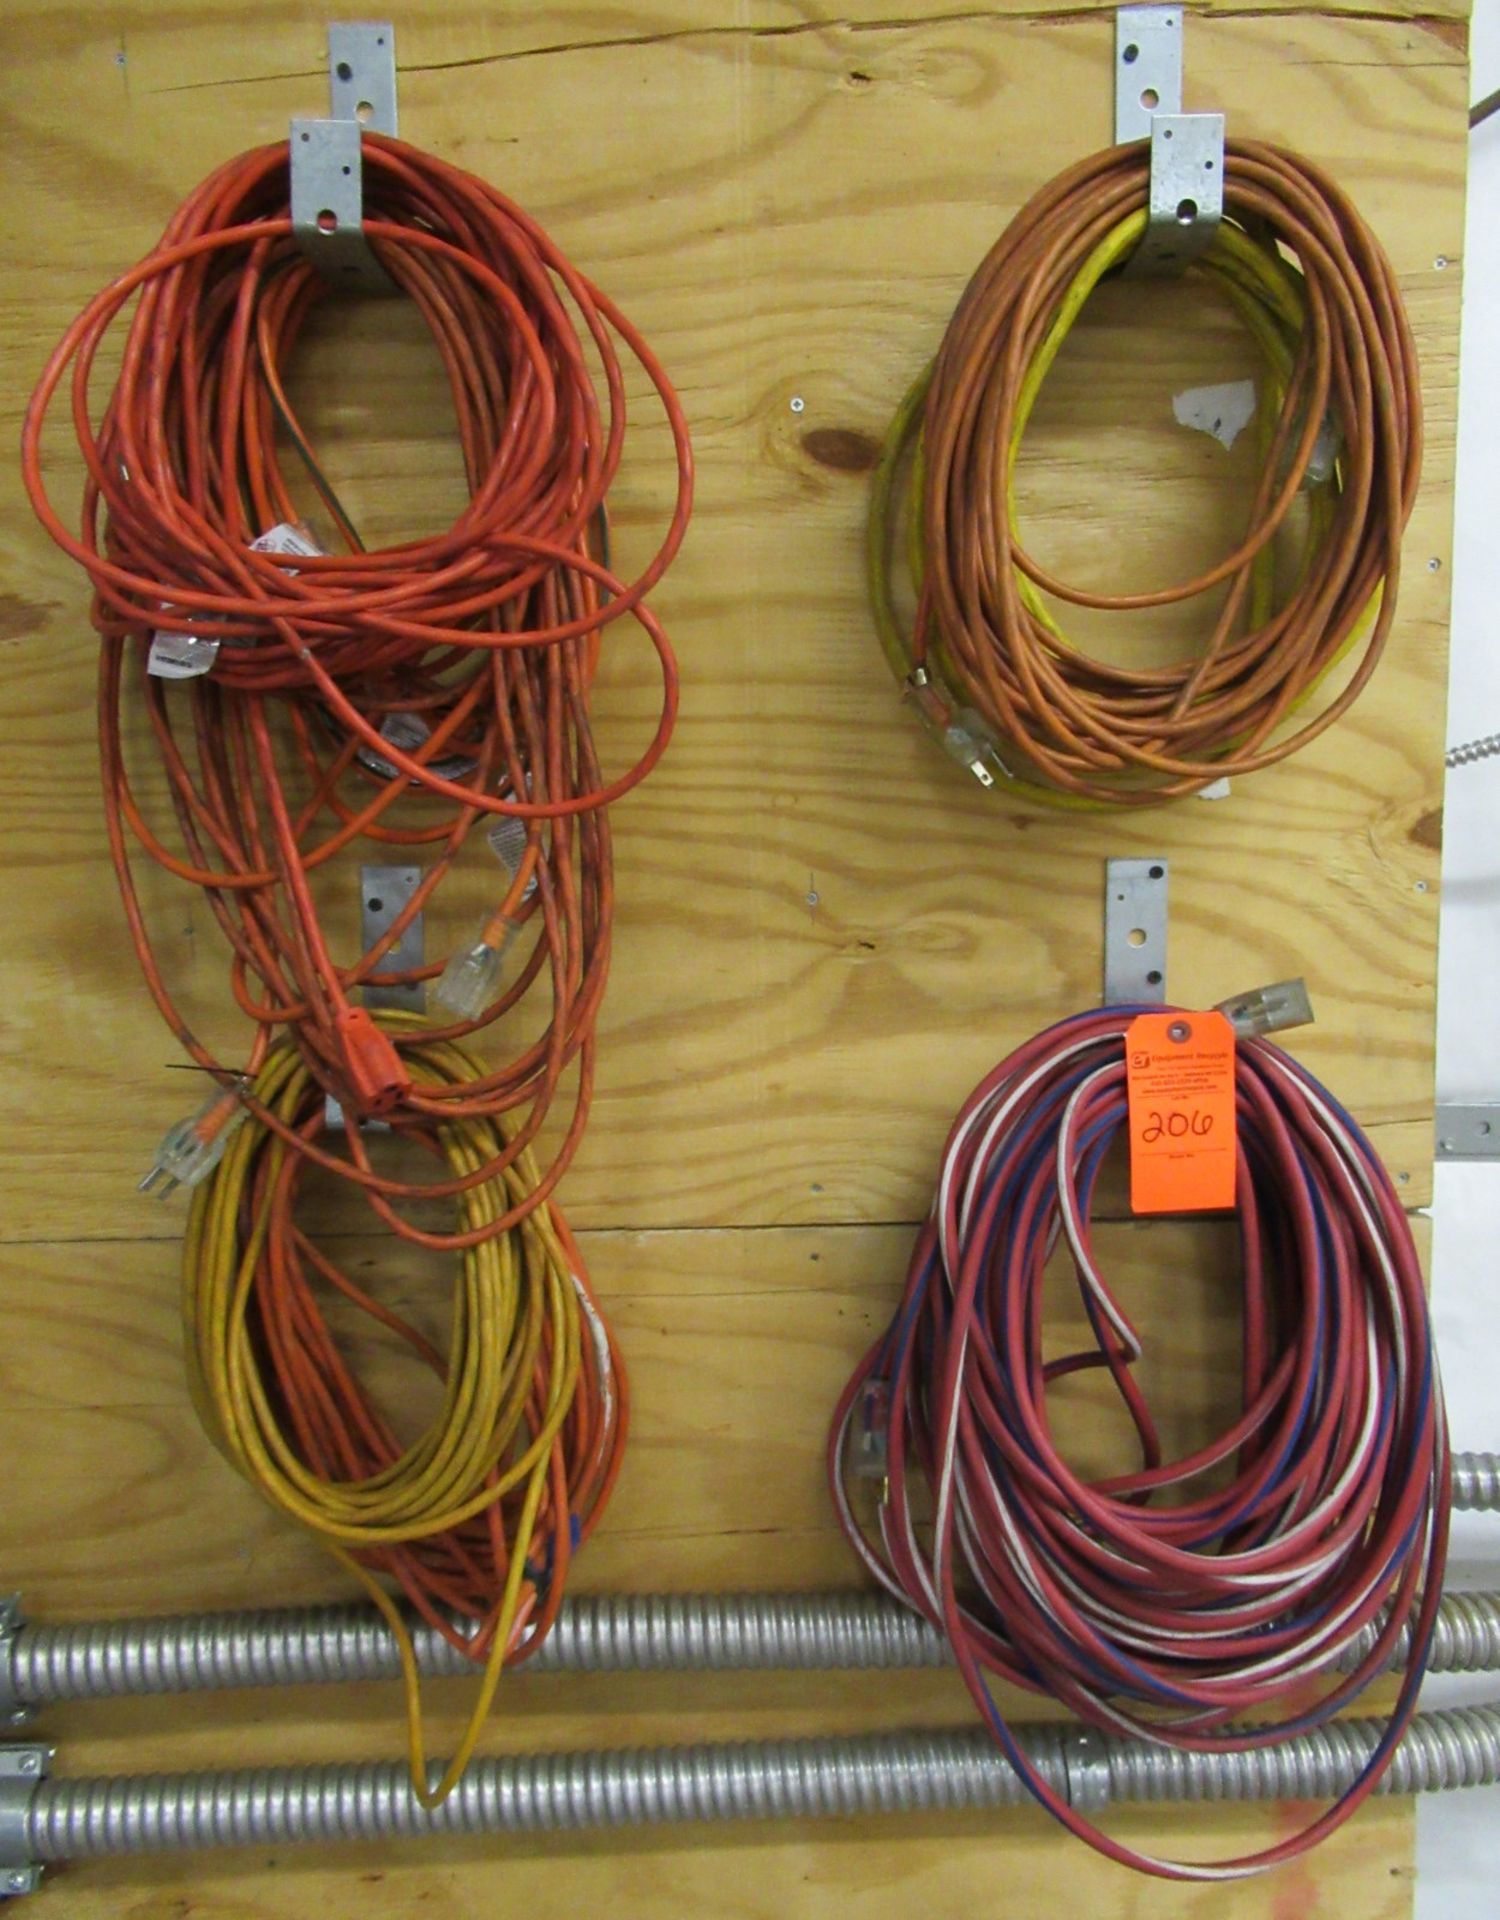 3 Heavy Duty Extension Cord and Reels S-19880 50 ft & 4 Extension Cords - Image 2 of 3